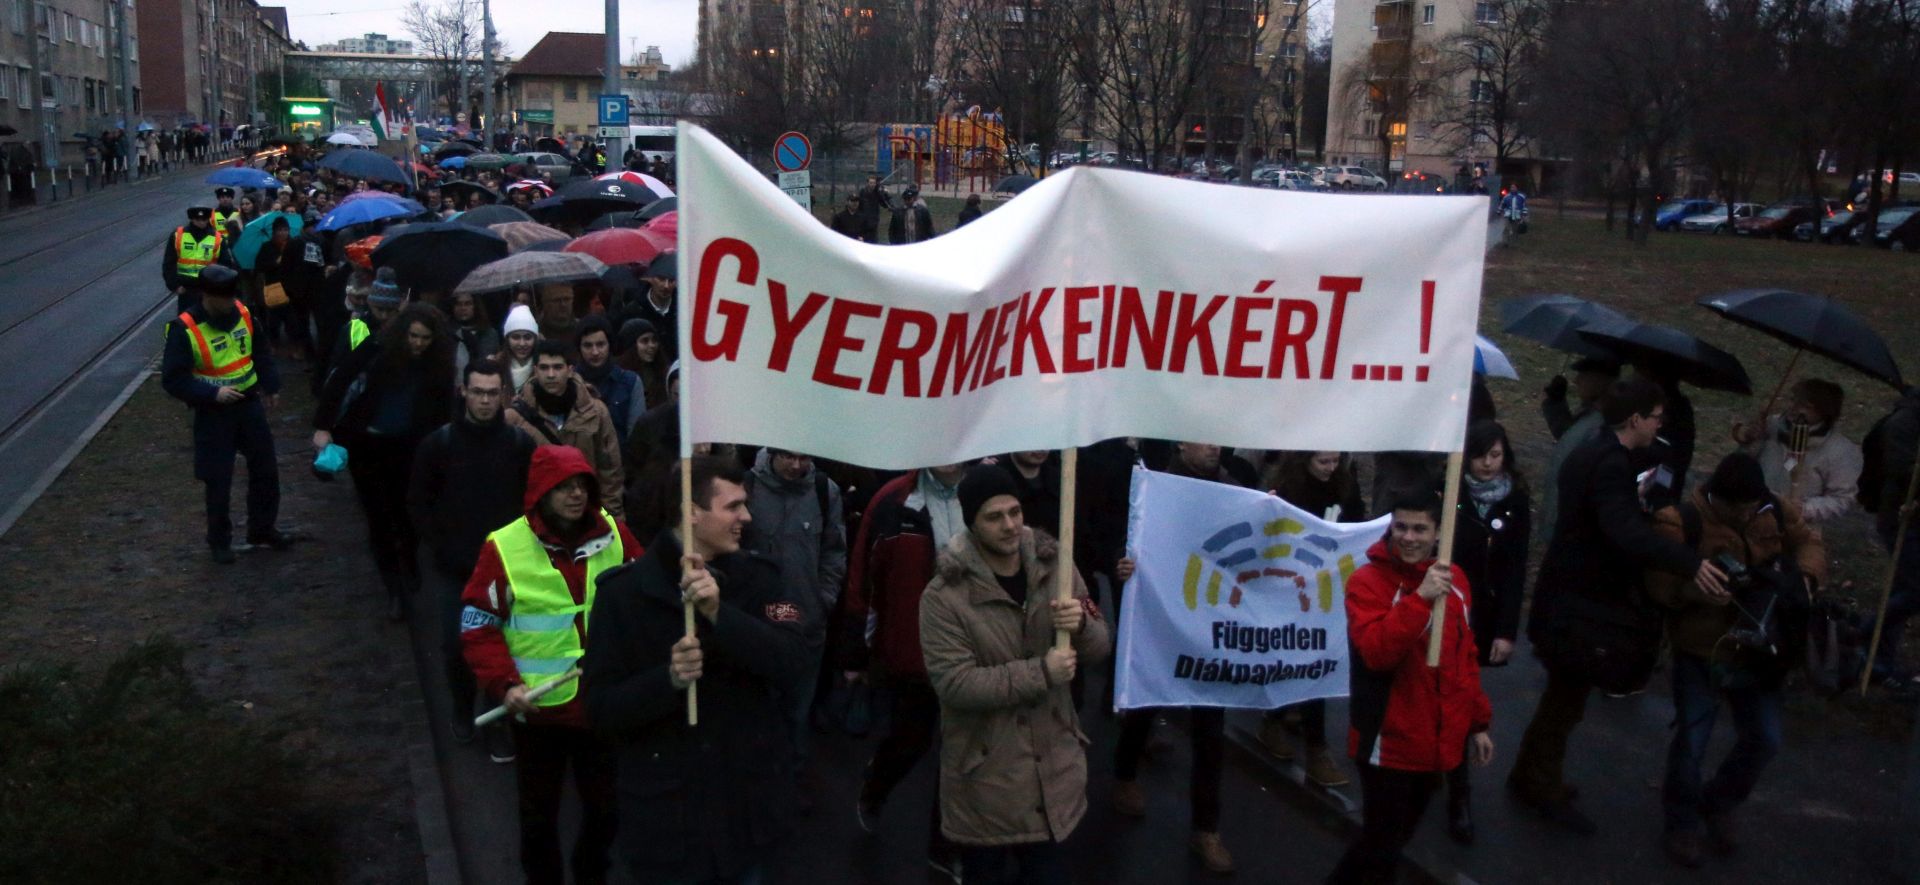 epa05141756 Participants of a teachers' strike march with a banner that reads 'For our children!', near Herman Otto Grammar School in Miskolc, 173 kms northeast of Budapest, Hungary, 03 February 2016. The demonstration dubbed a 'Parent-teacher conference' is staged against the current state of the Hungarian education system.  EPA/JANOS VAJDA HUNGARY OUT